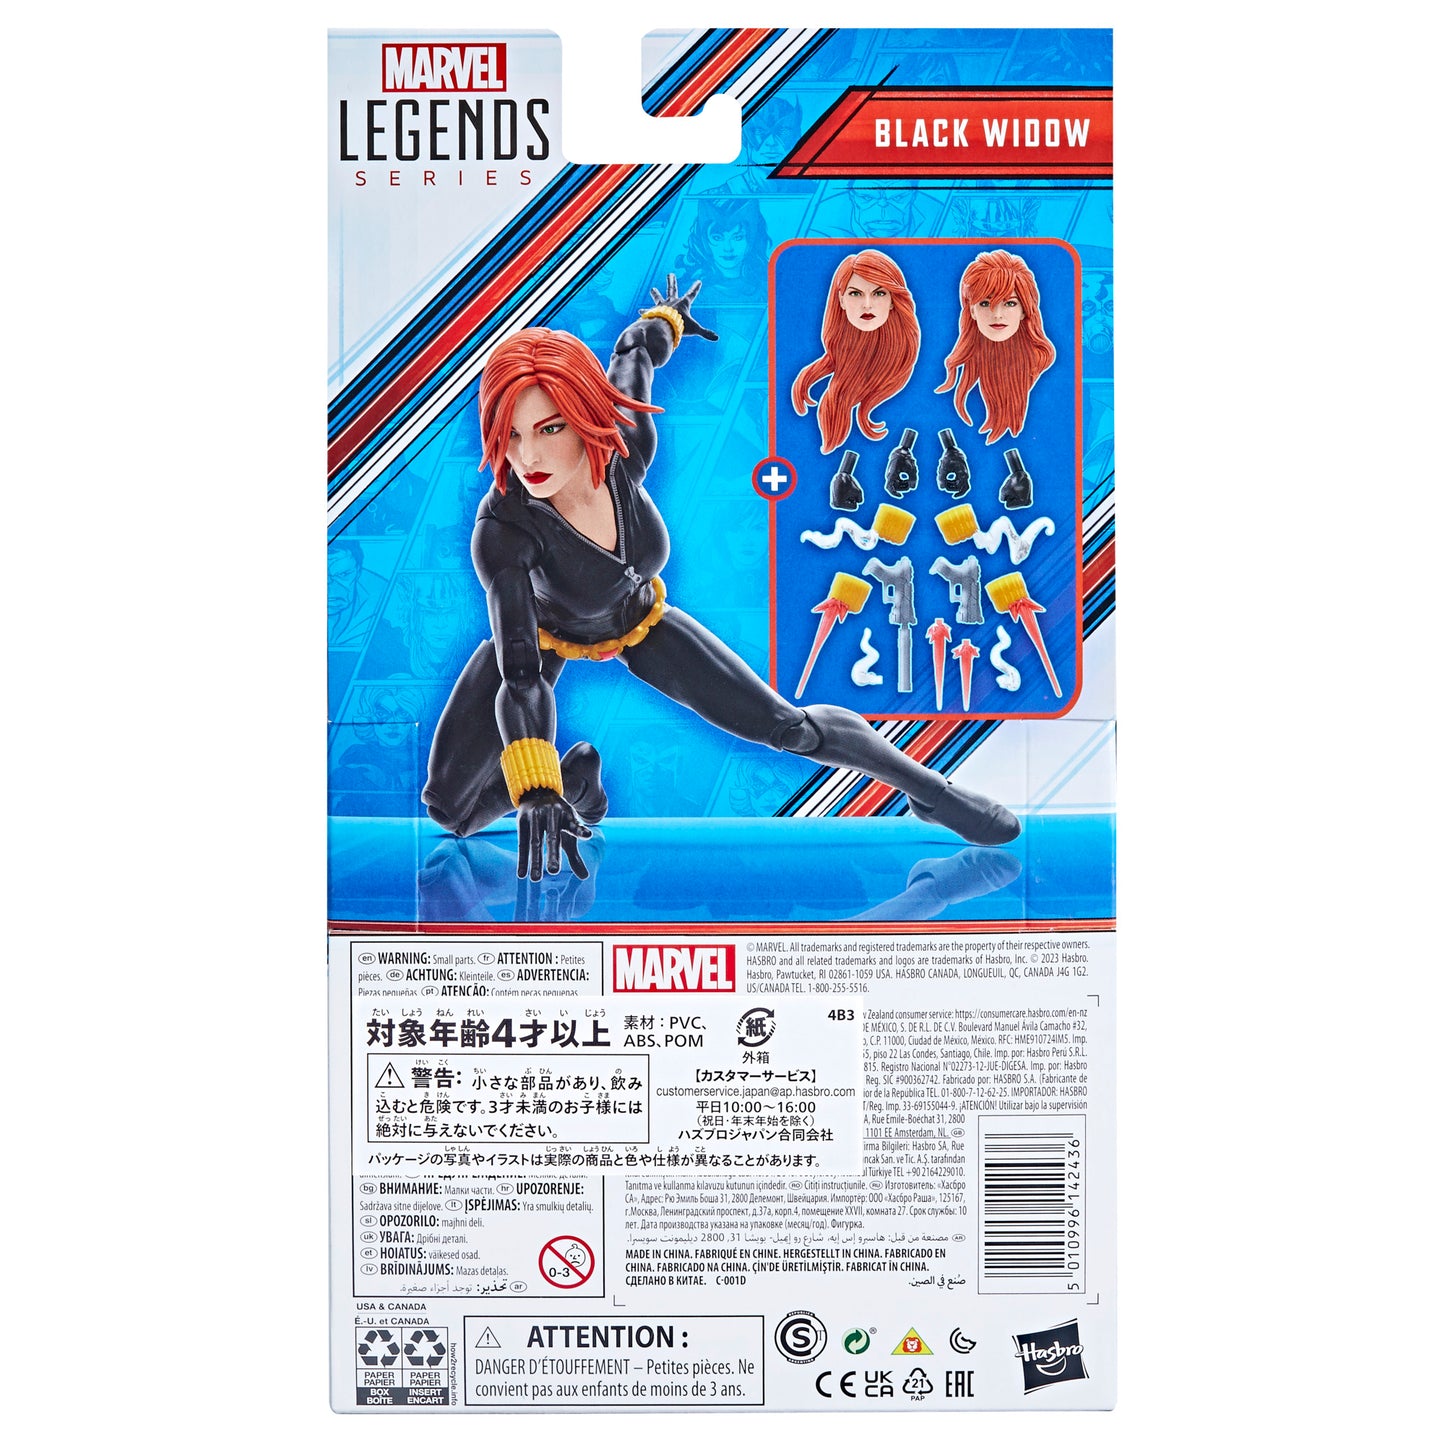 Hasbro Marvel Legends Series Black Widow Avengers 60th Anniversary Collectible 6 Inch Action Figure